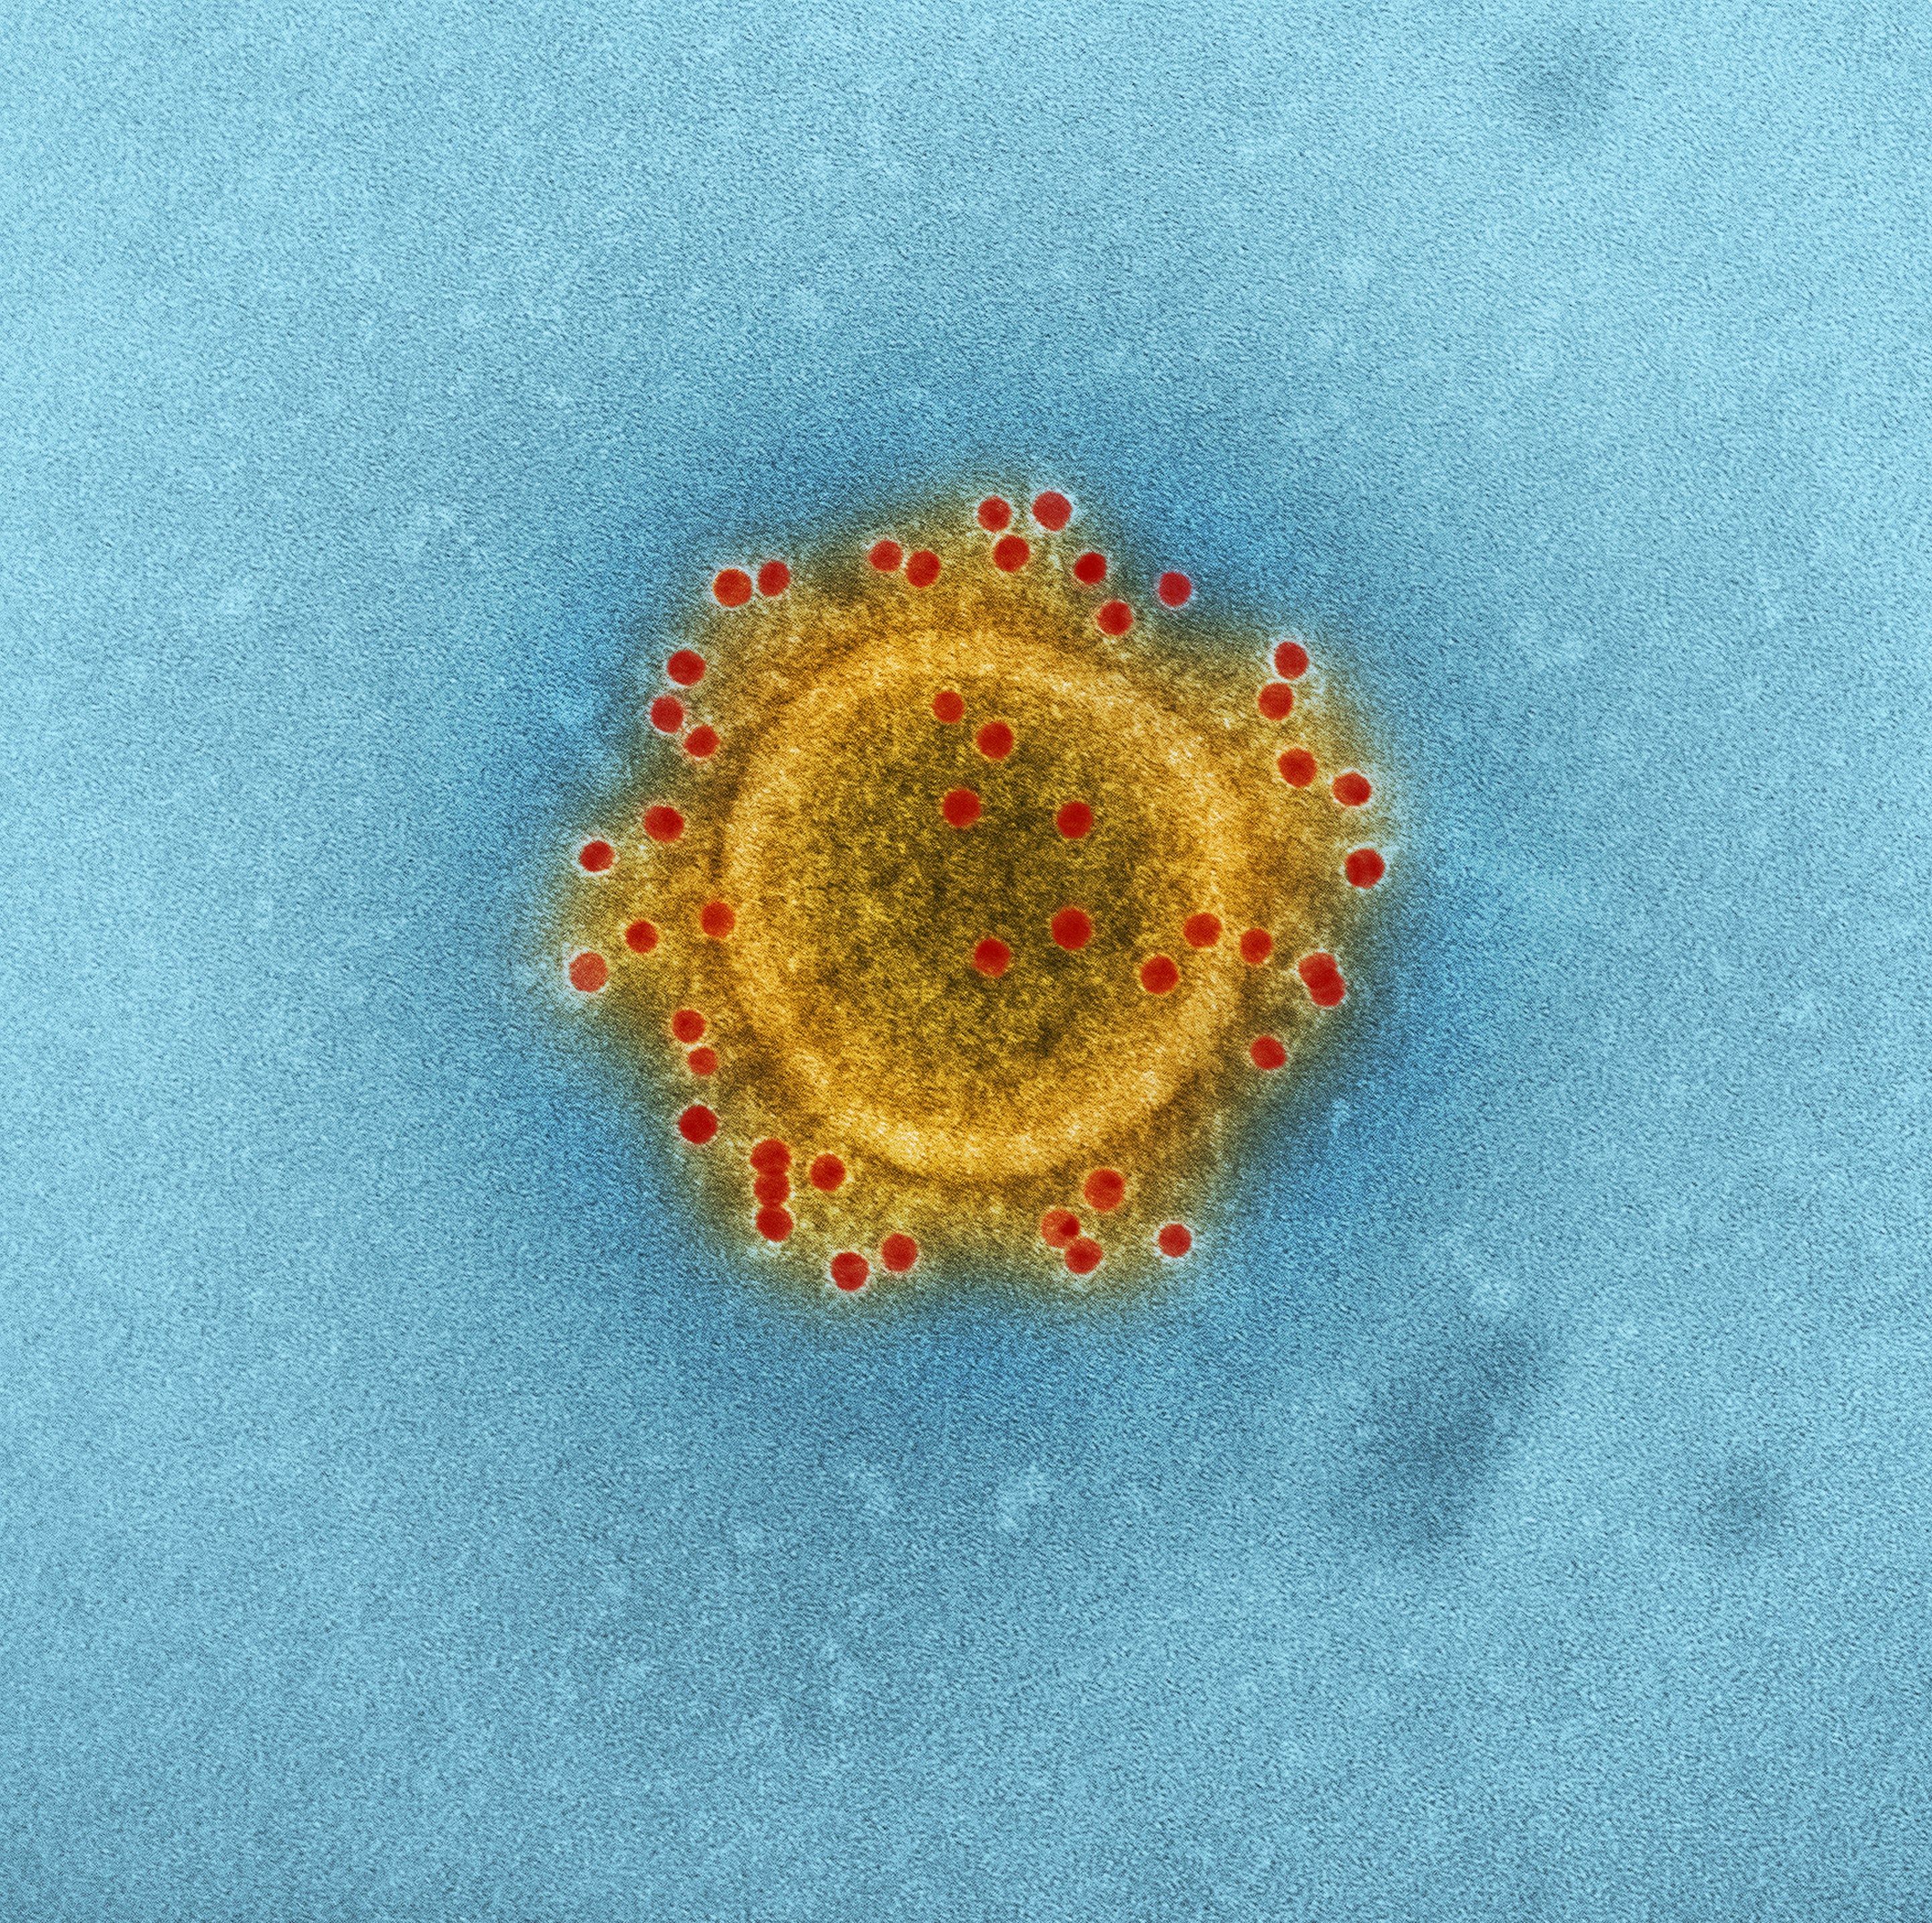 Produced by the National Institute of Allergy and Infectious Diseases (NIAID), this highly magnified, digitally colorized transmission electron microscopic (TEM) image highlights the particle envelope of a single, spherical shaped, Middle East respiratory syndrome coronavirus (MERS-CoV) virion, through the process of immunolabeling, the envelope proteins, using rabbit HCoV-EMC/2012 primary antibody, and goat anti-rabbit 10nm gold particles.